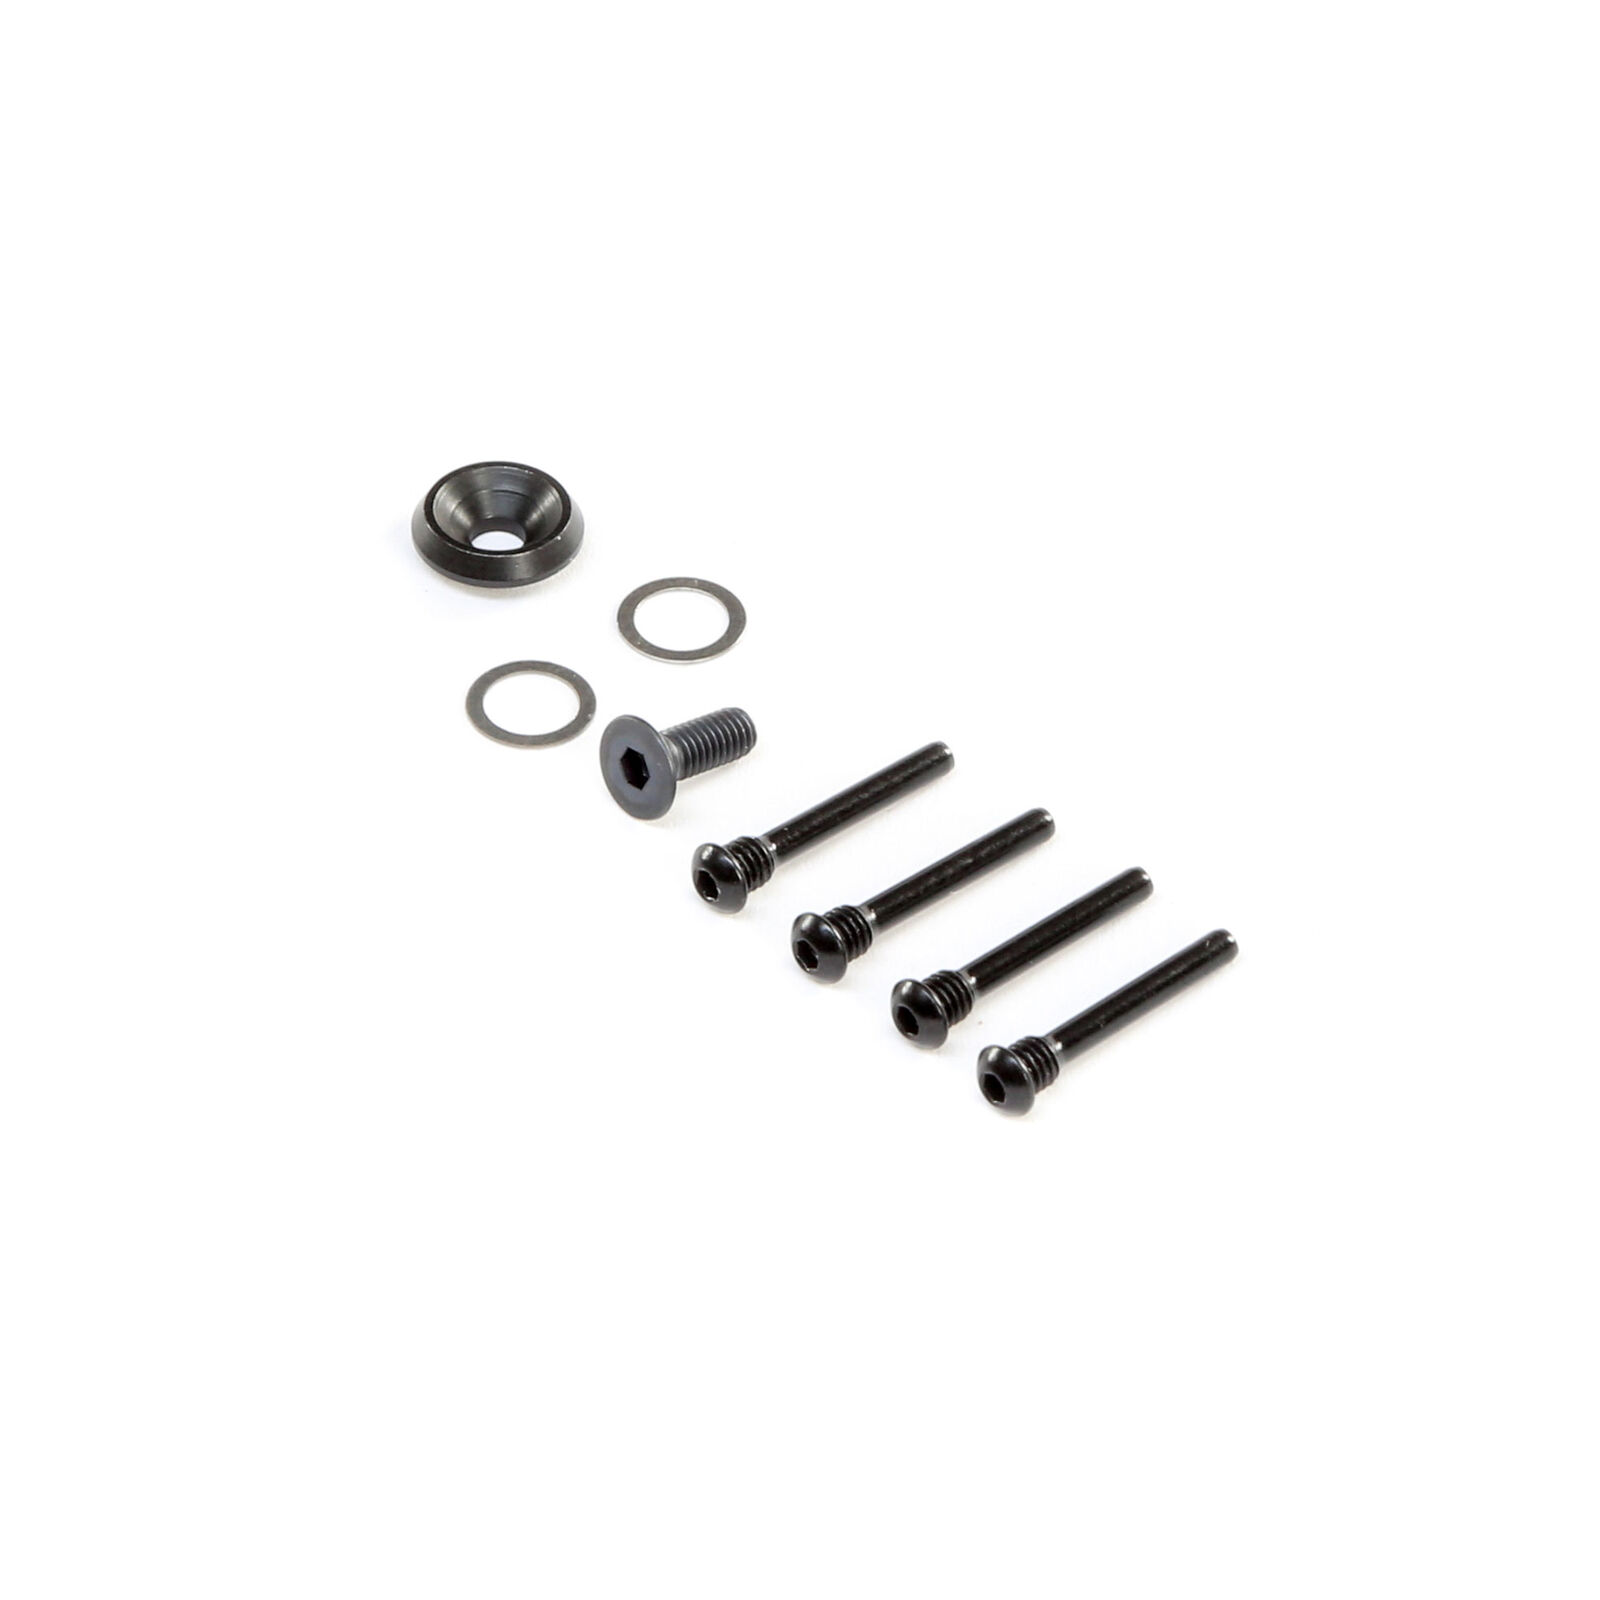 Team Losi Racing 8IGHT-X Clutch Pins and Hardware 